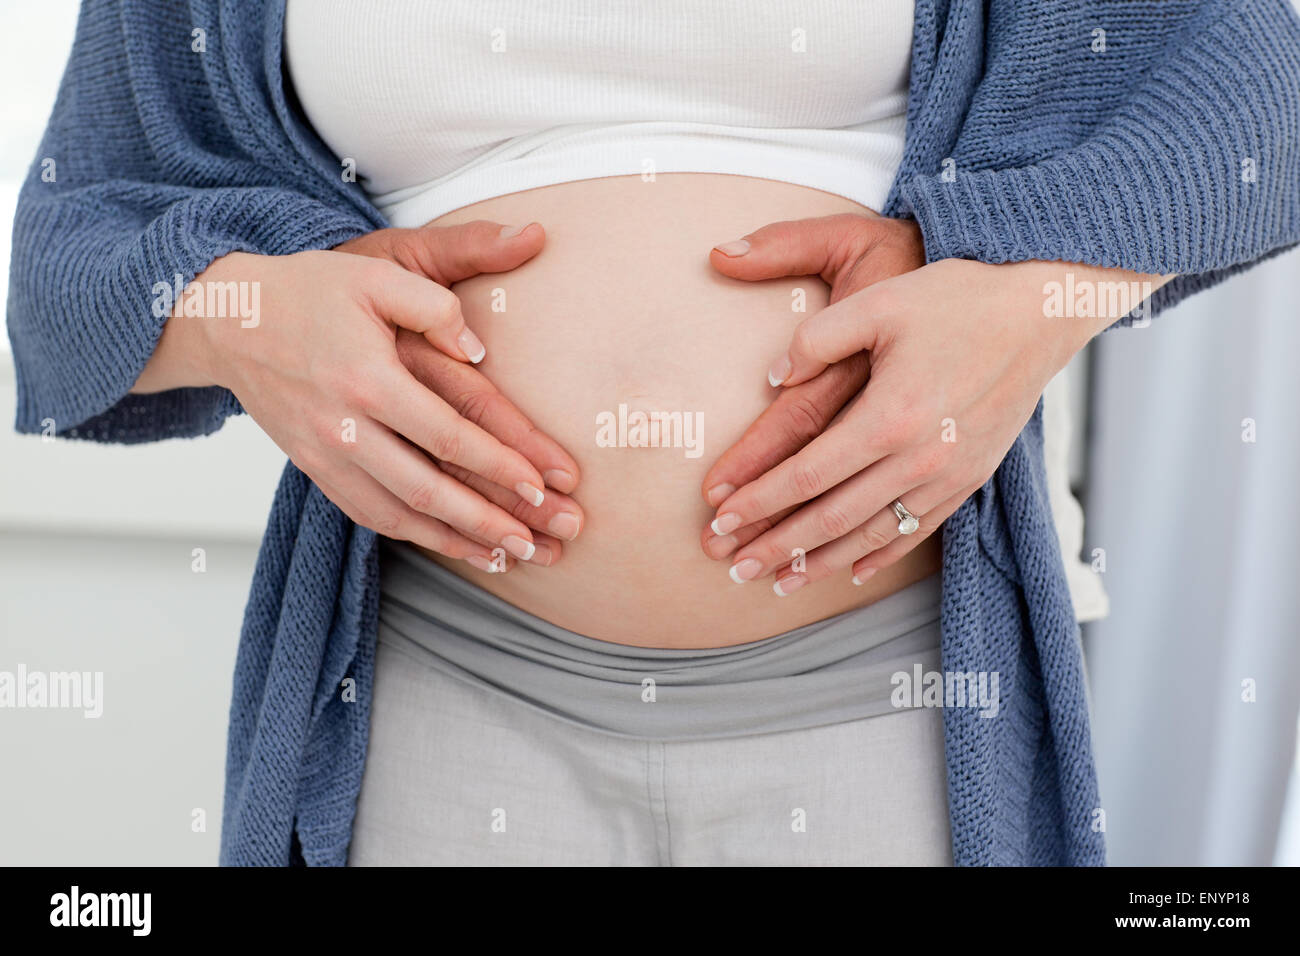 Couple's hand on the belly of the pregnant woman Stock Photo